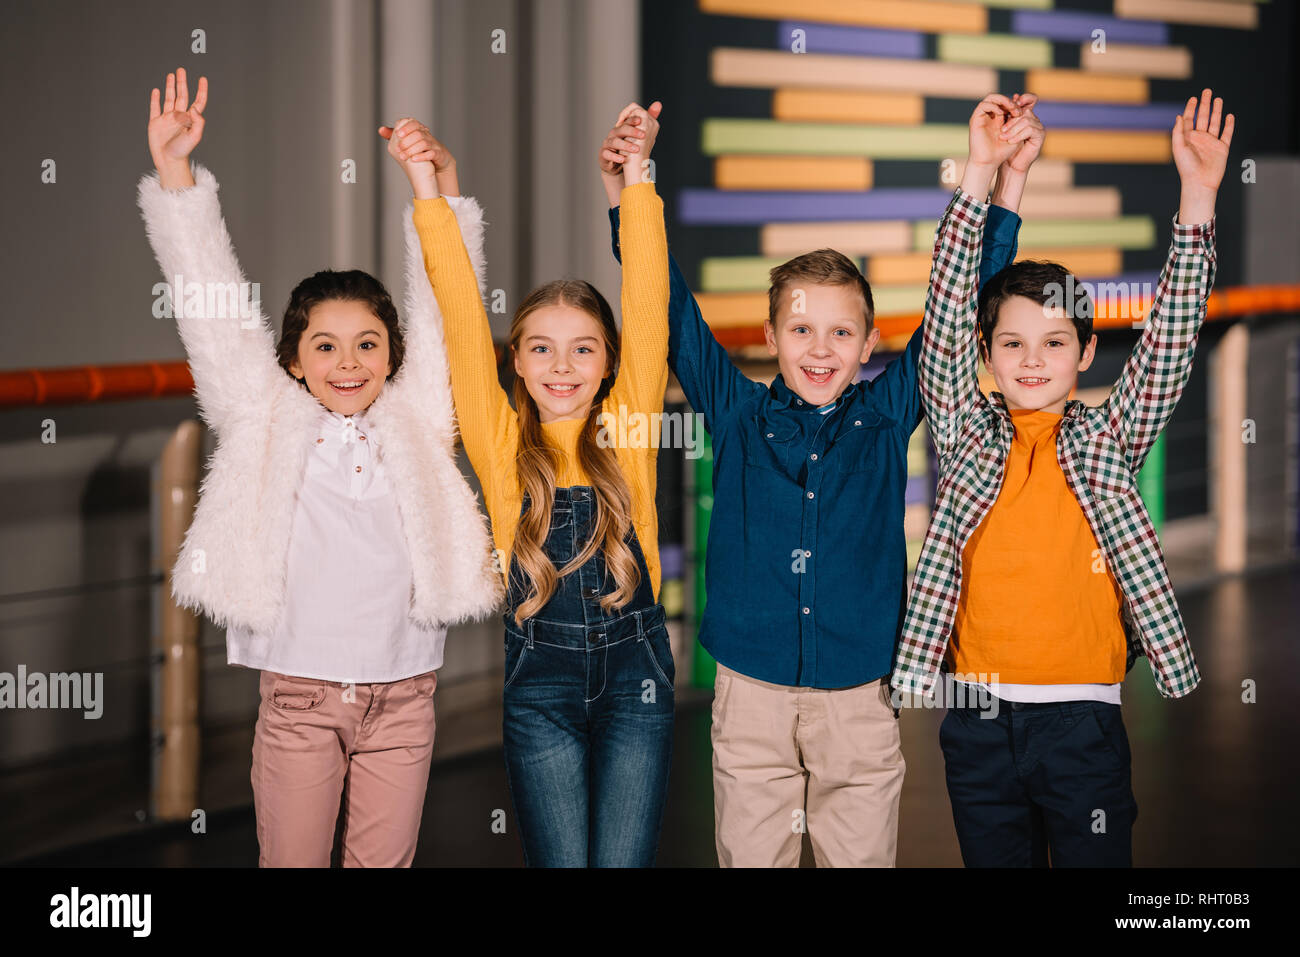 Group of kids laughing and holding hands Stock Photo